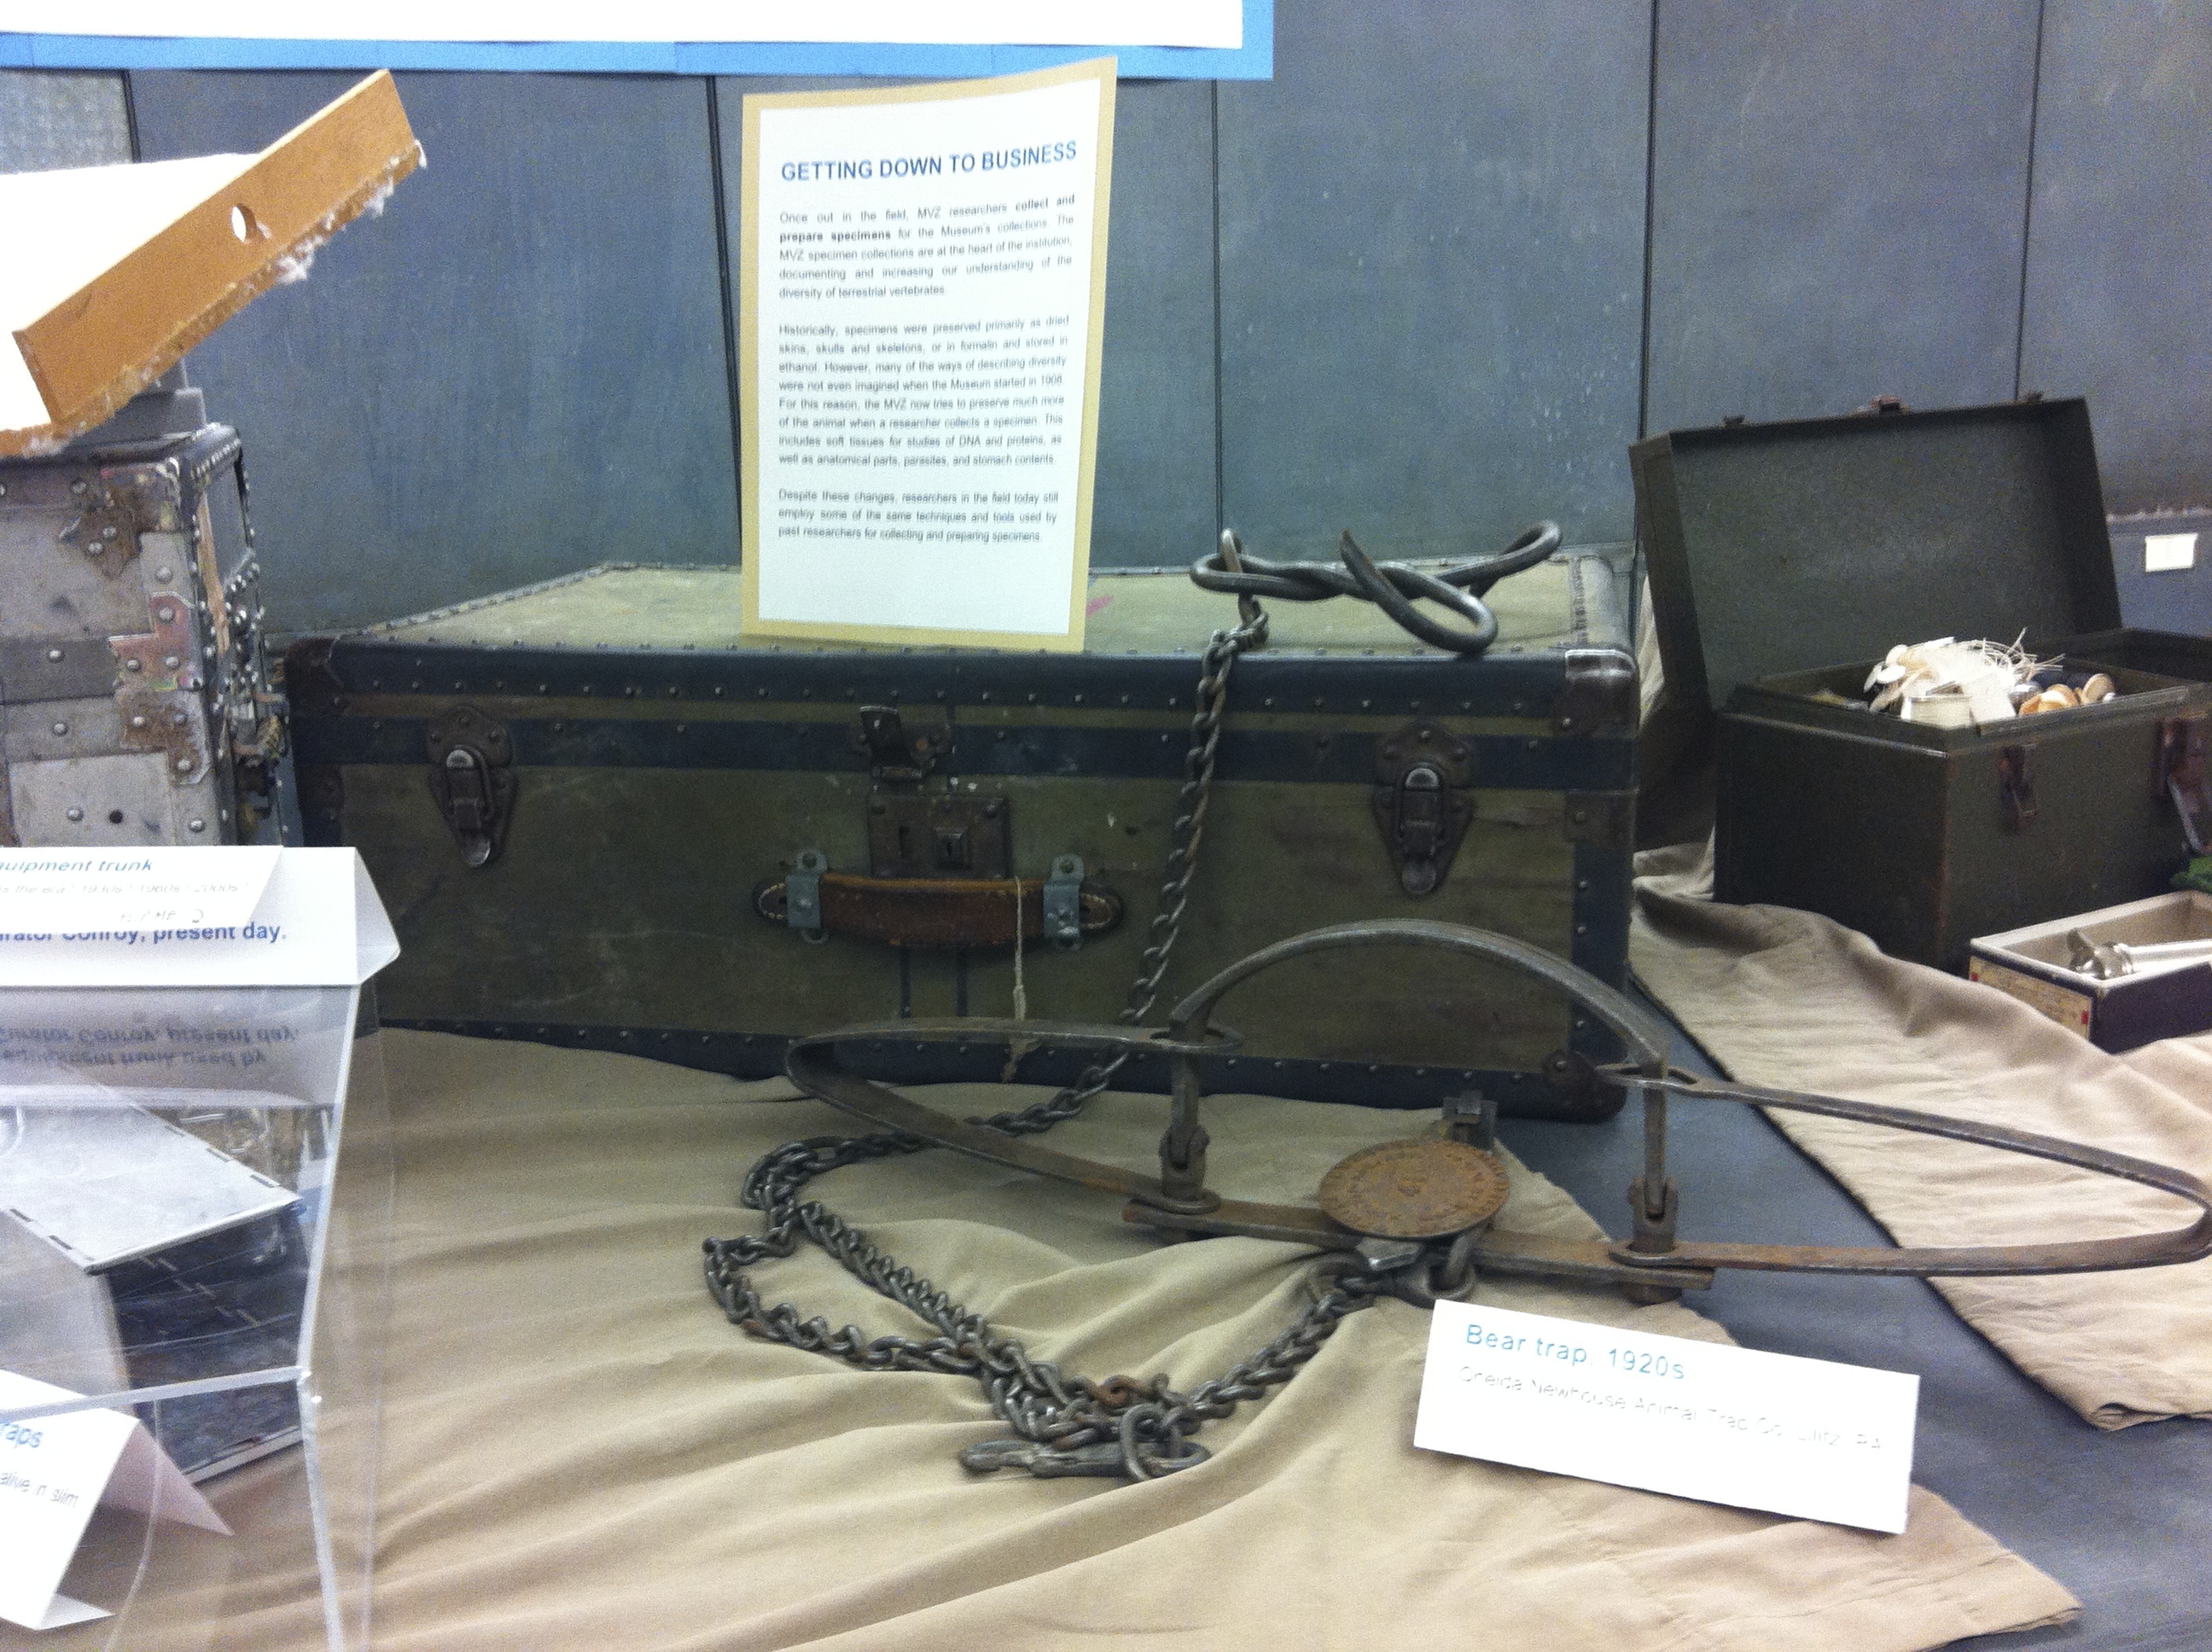 An equipment trunk used in the field today, and a bear trap from the 1920s.